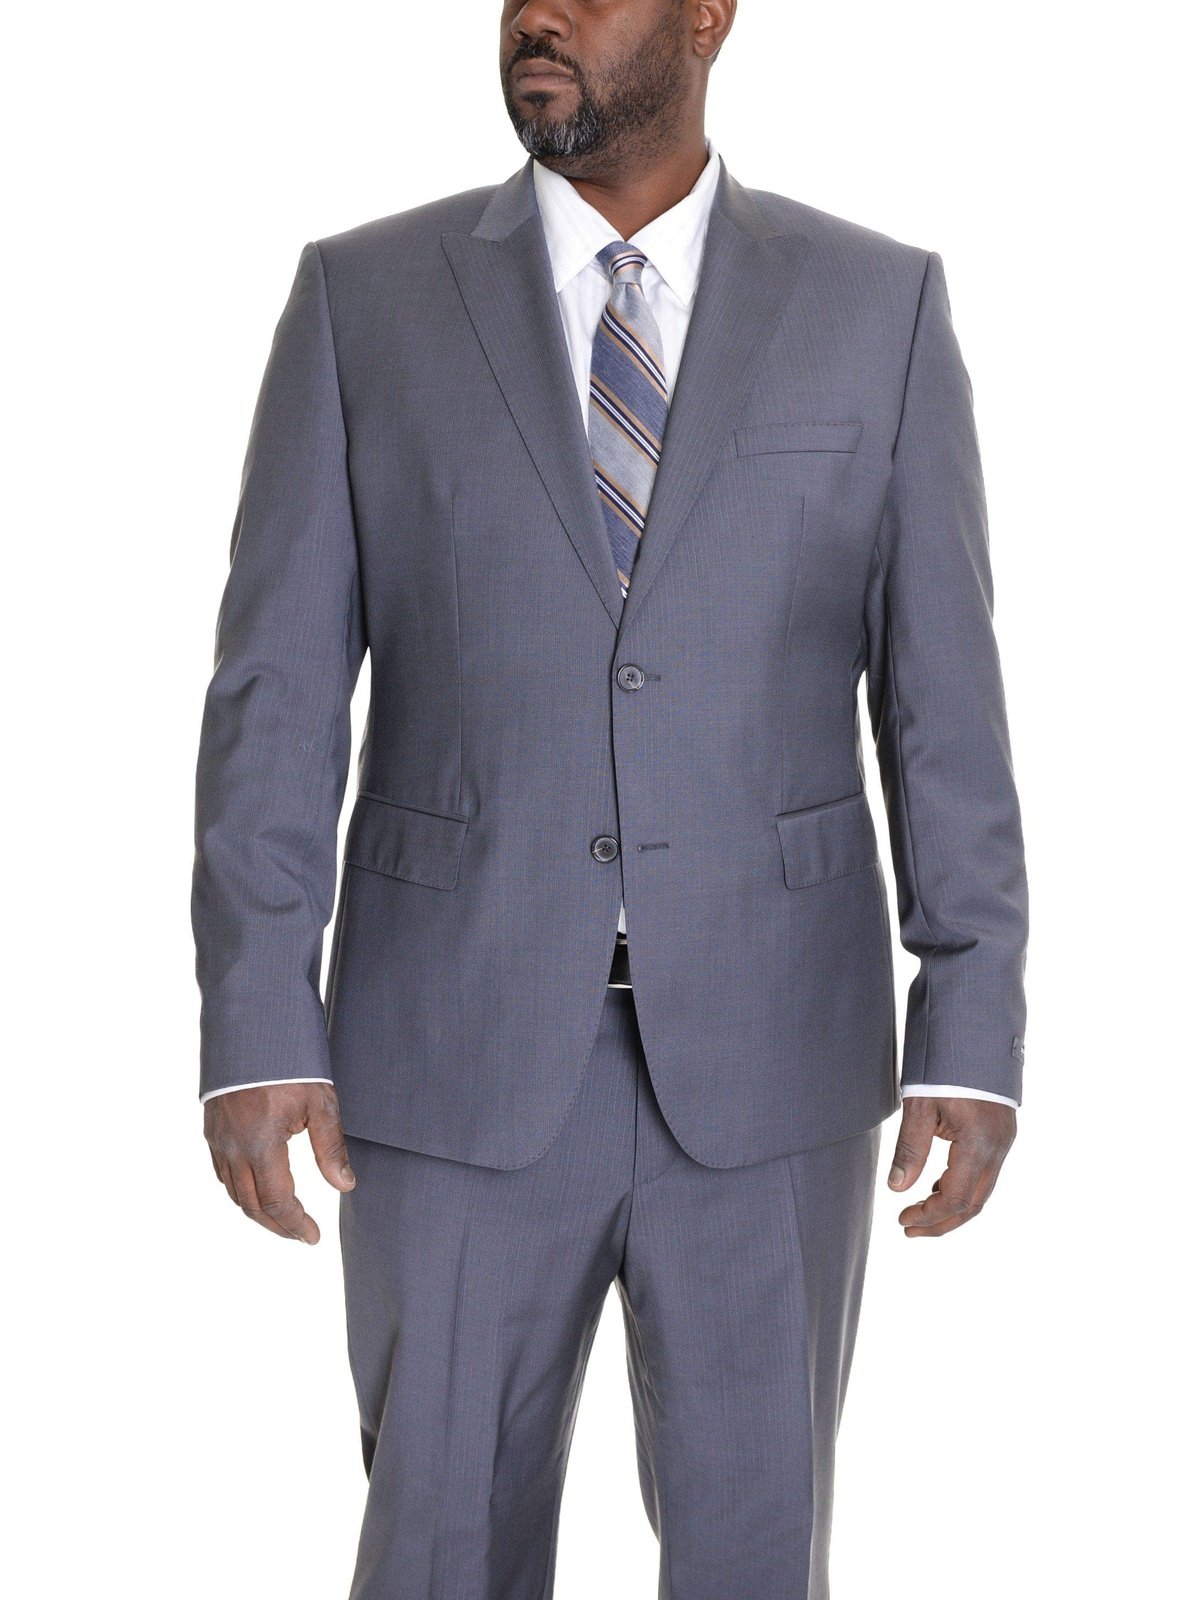 HUGO BOSS TWO PIECE SUITS Hugo Boss The Fordham/central Heather Gray Wool Suit With Peak Lapels